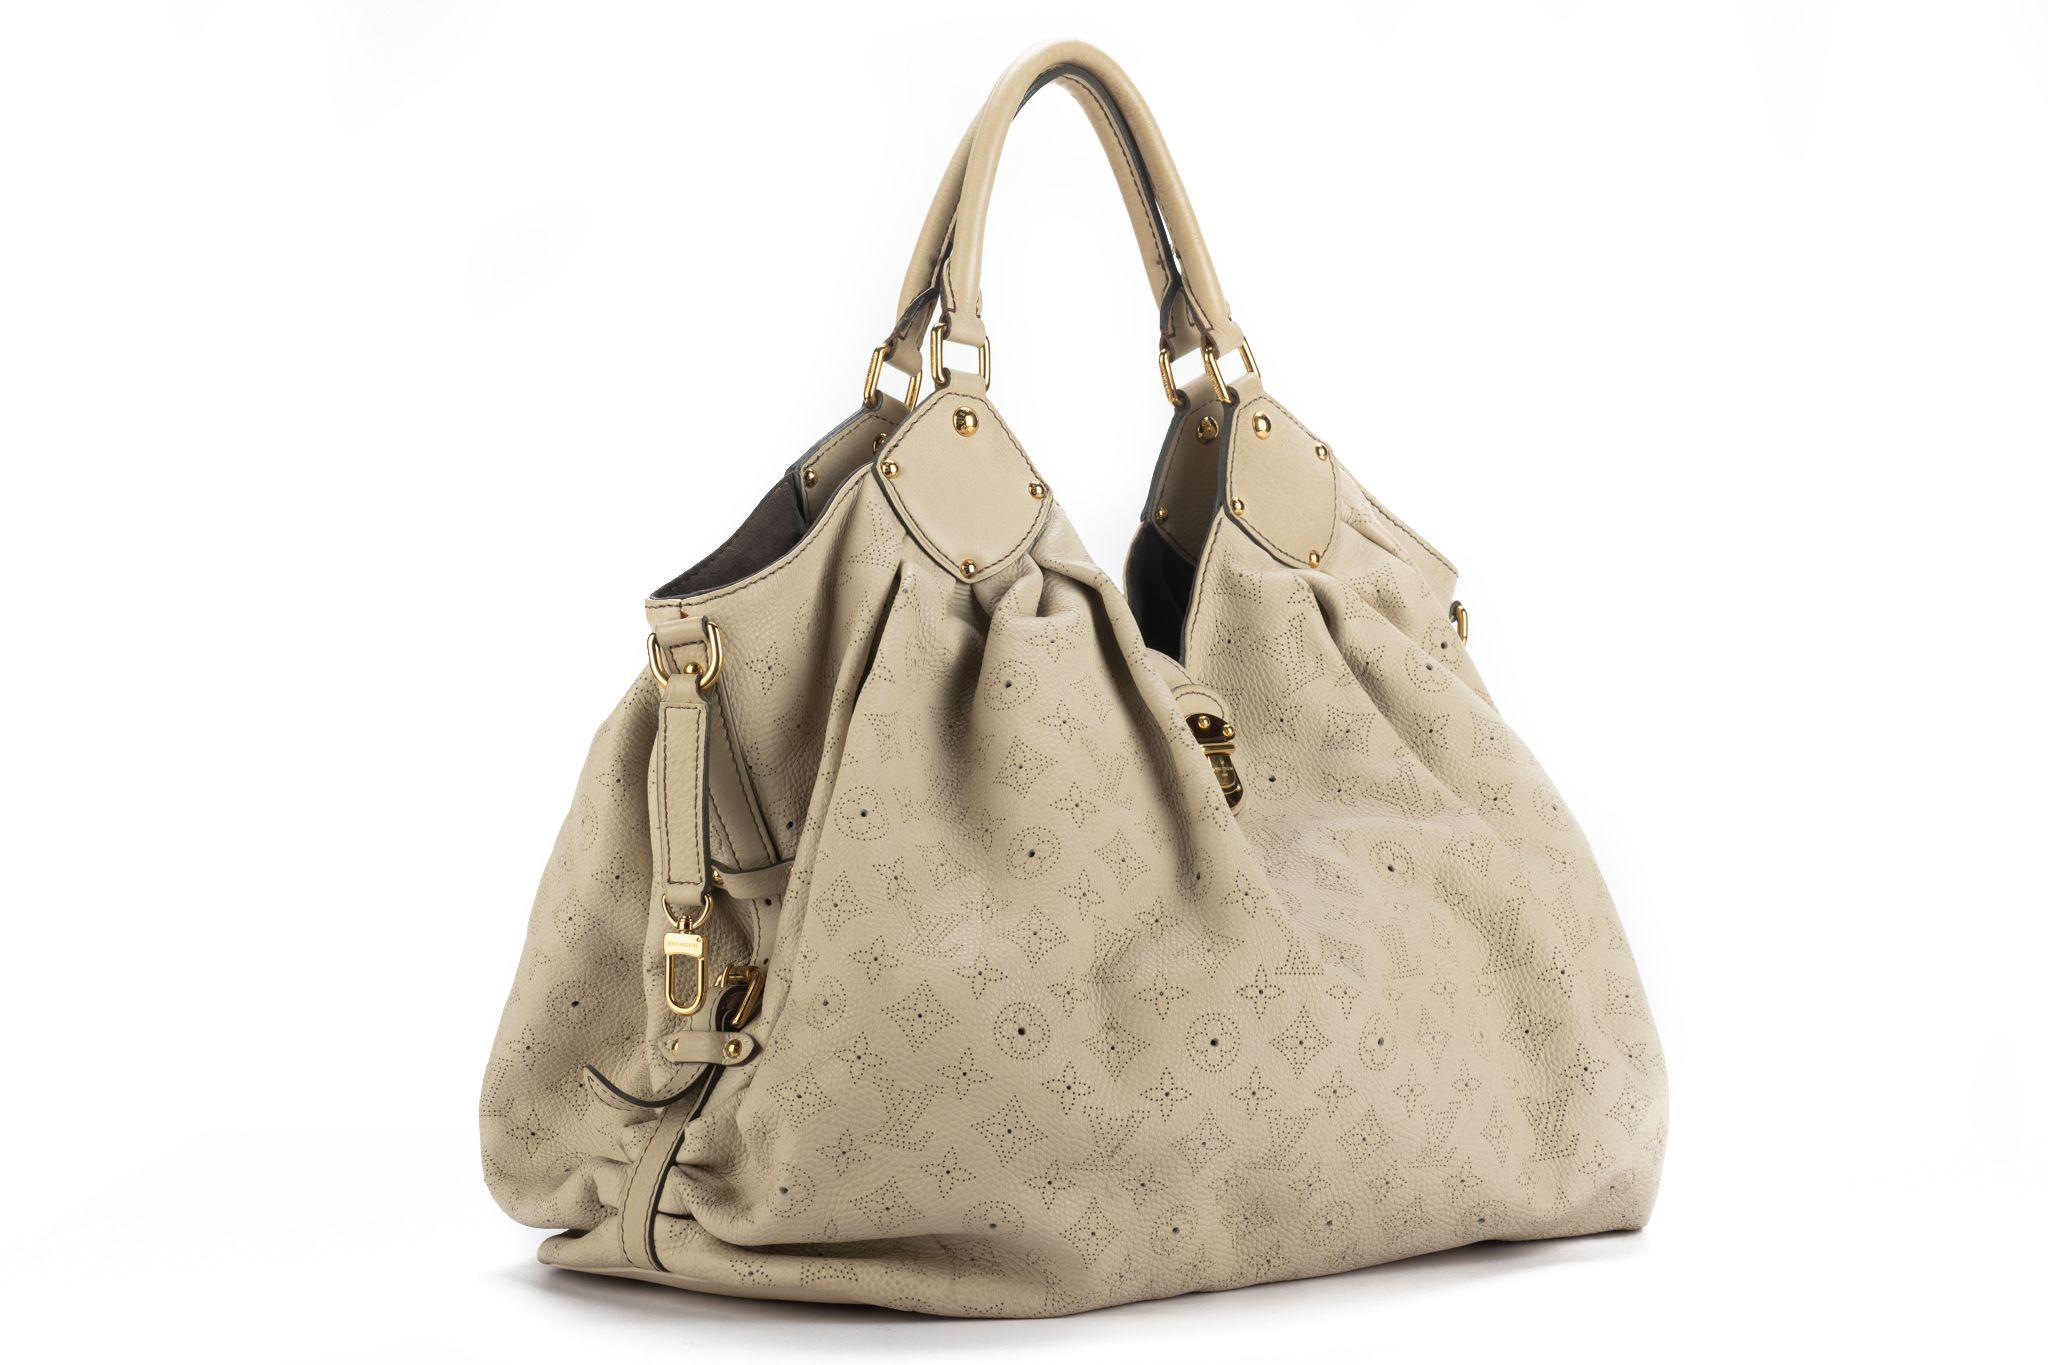 Louis Vuitton extra large cream mahina shoulder bag. Logo perforated leather and gold tone hardware. Excellent condition except minor red marks in the back, please refer to photos. Handle drop 9.5”. Comes with generic dust cover.